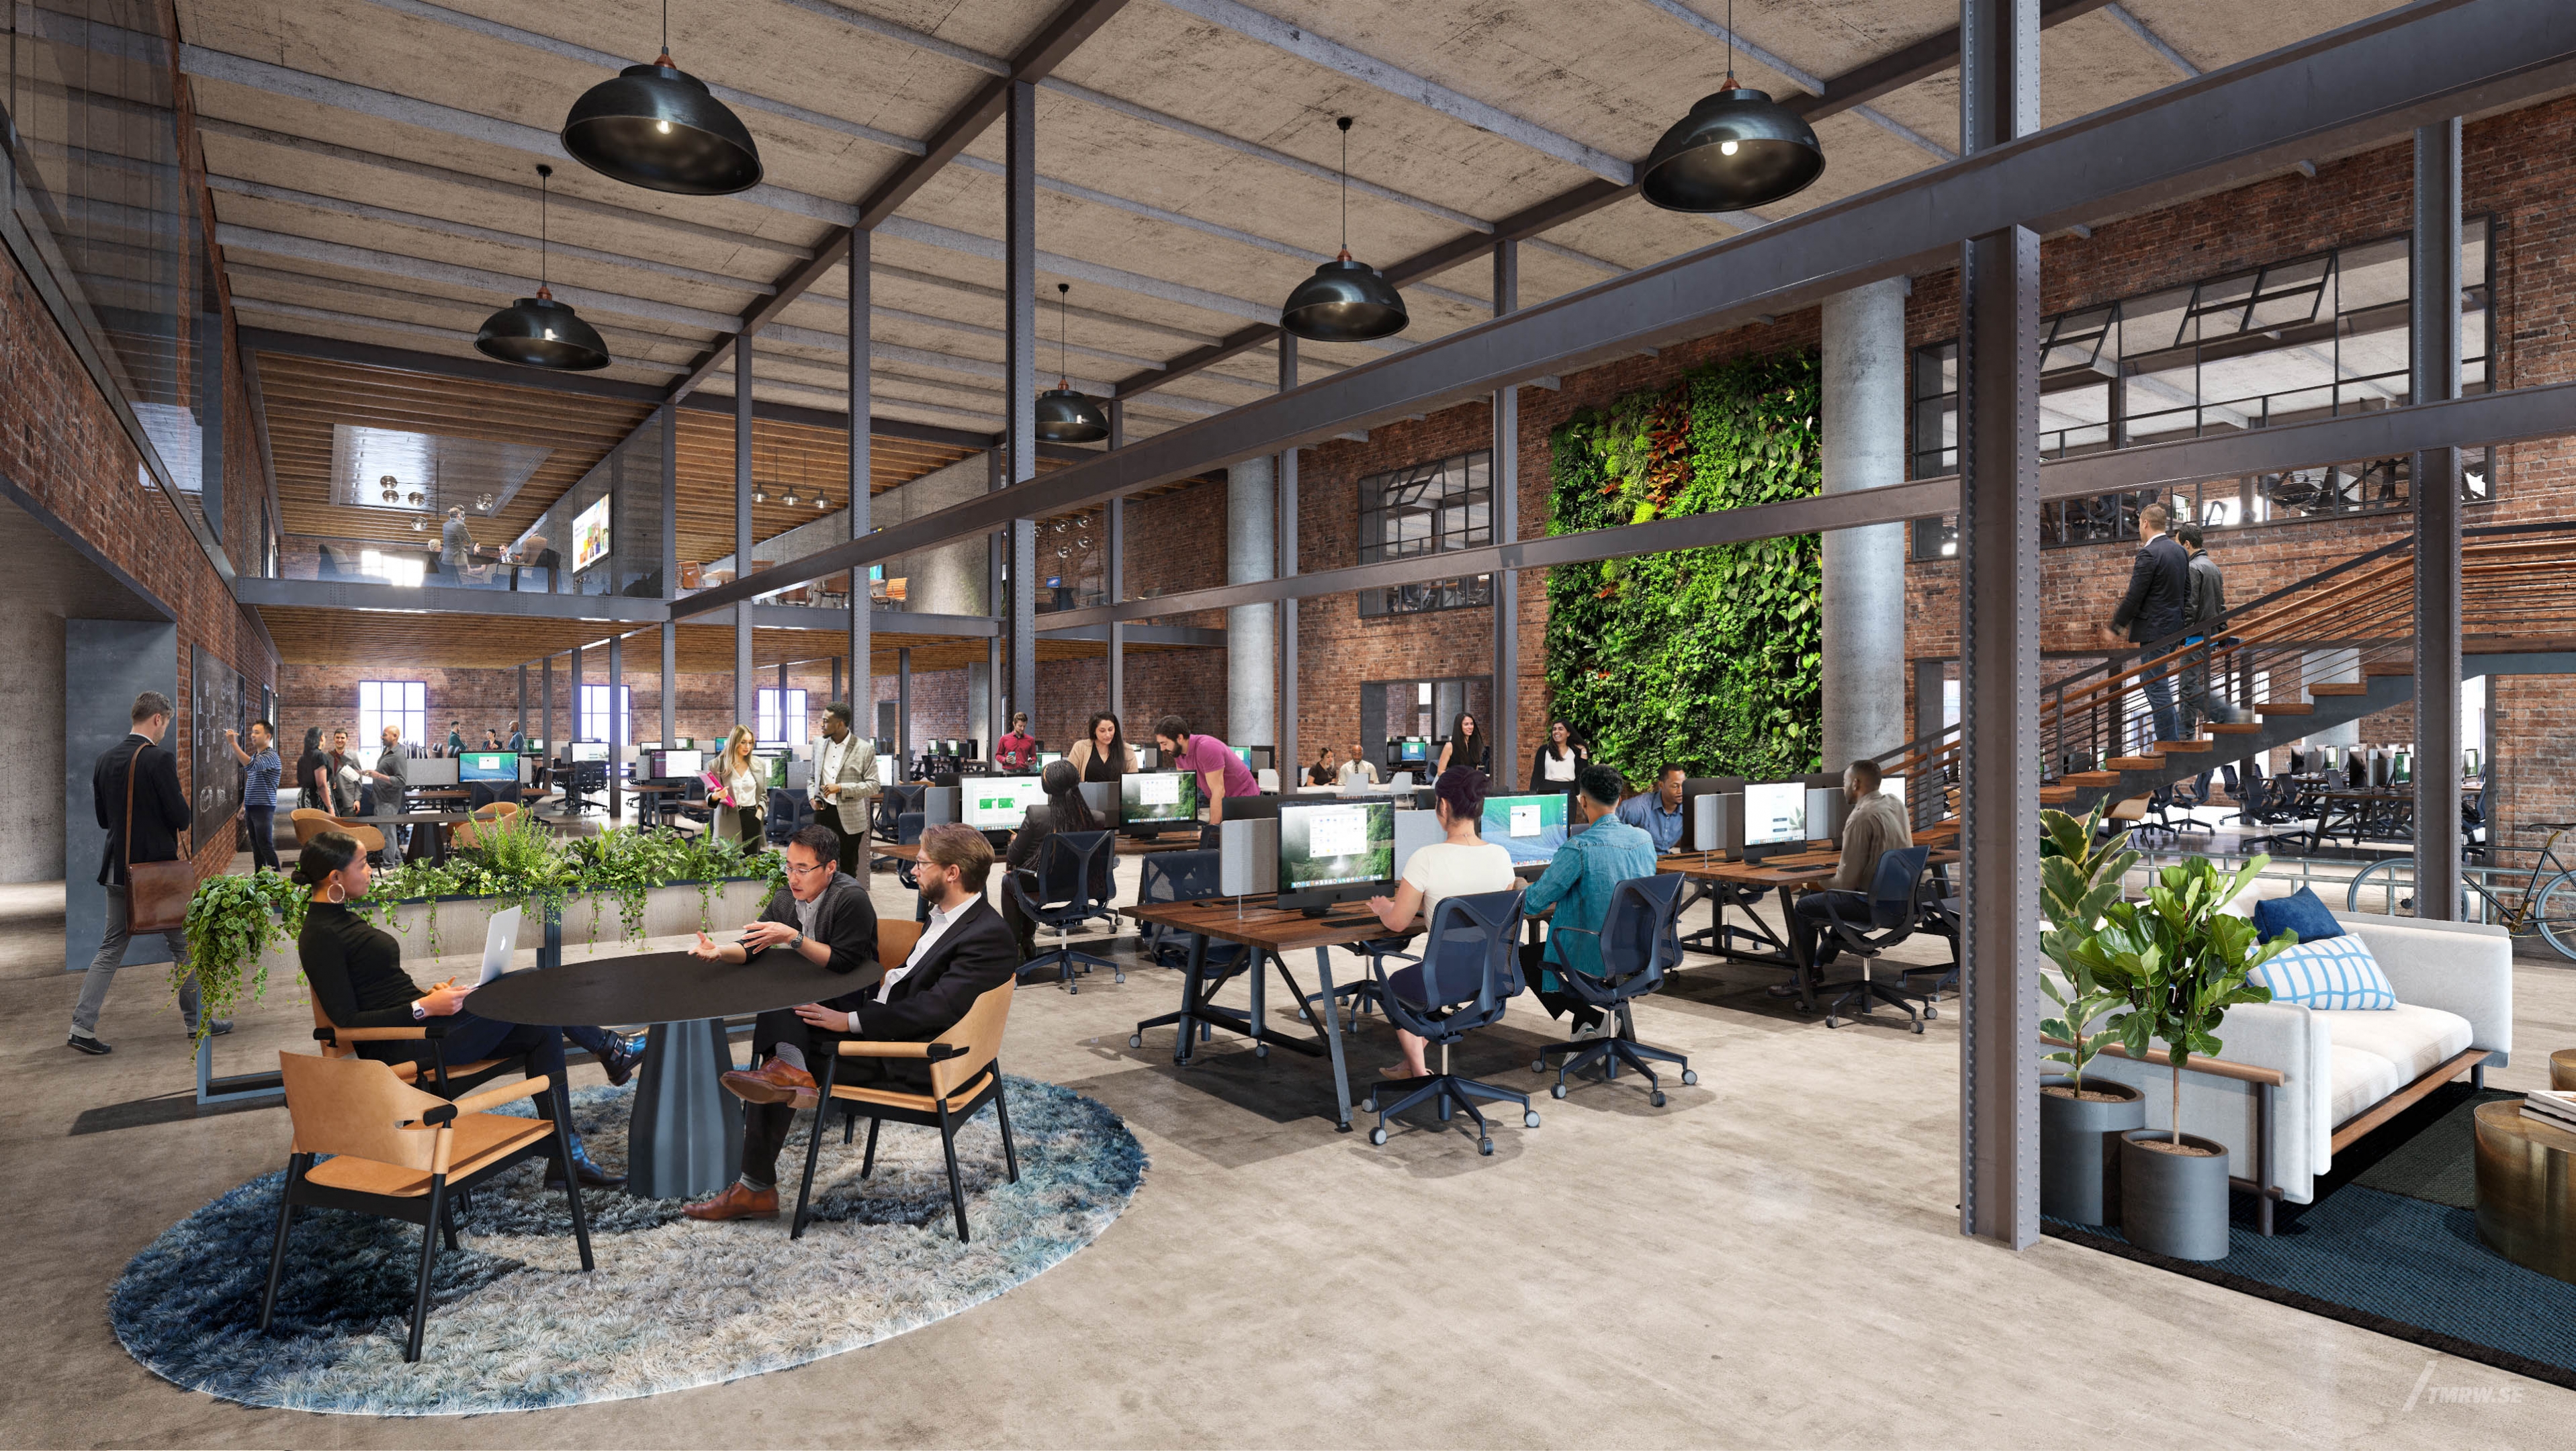 Architectural visualization of Terminal Warehouse for Gensler, a office area with people hanging out in day light from an interior view.